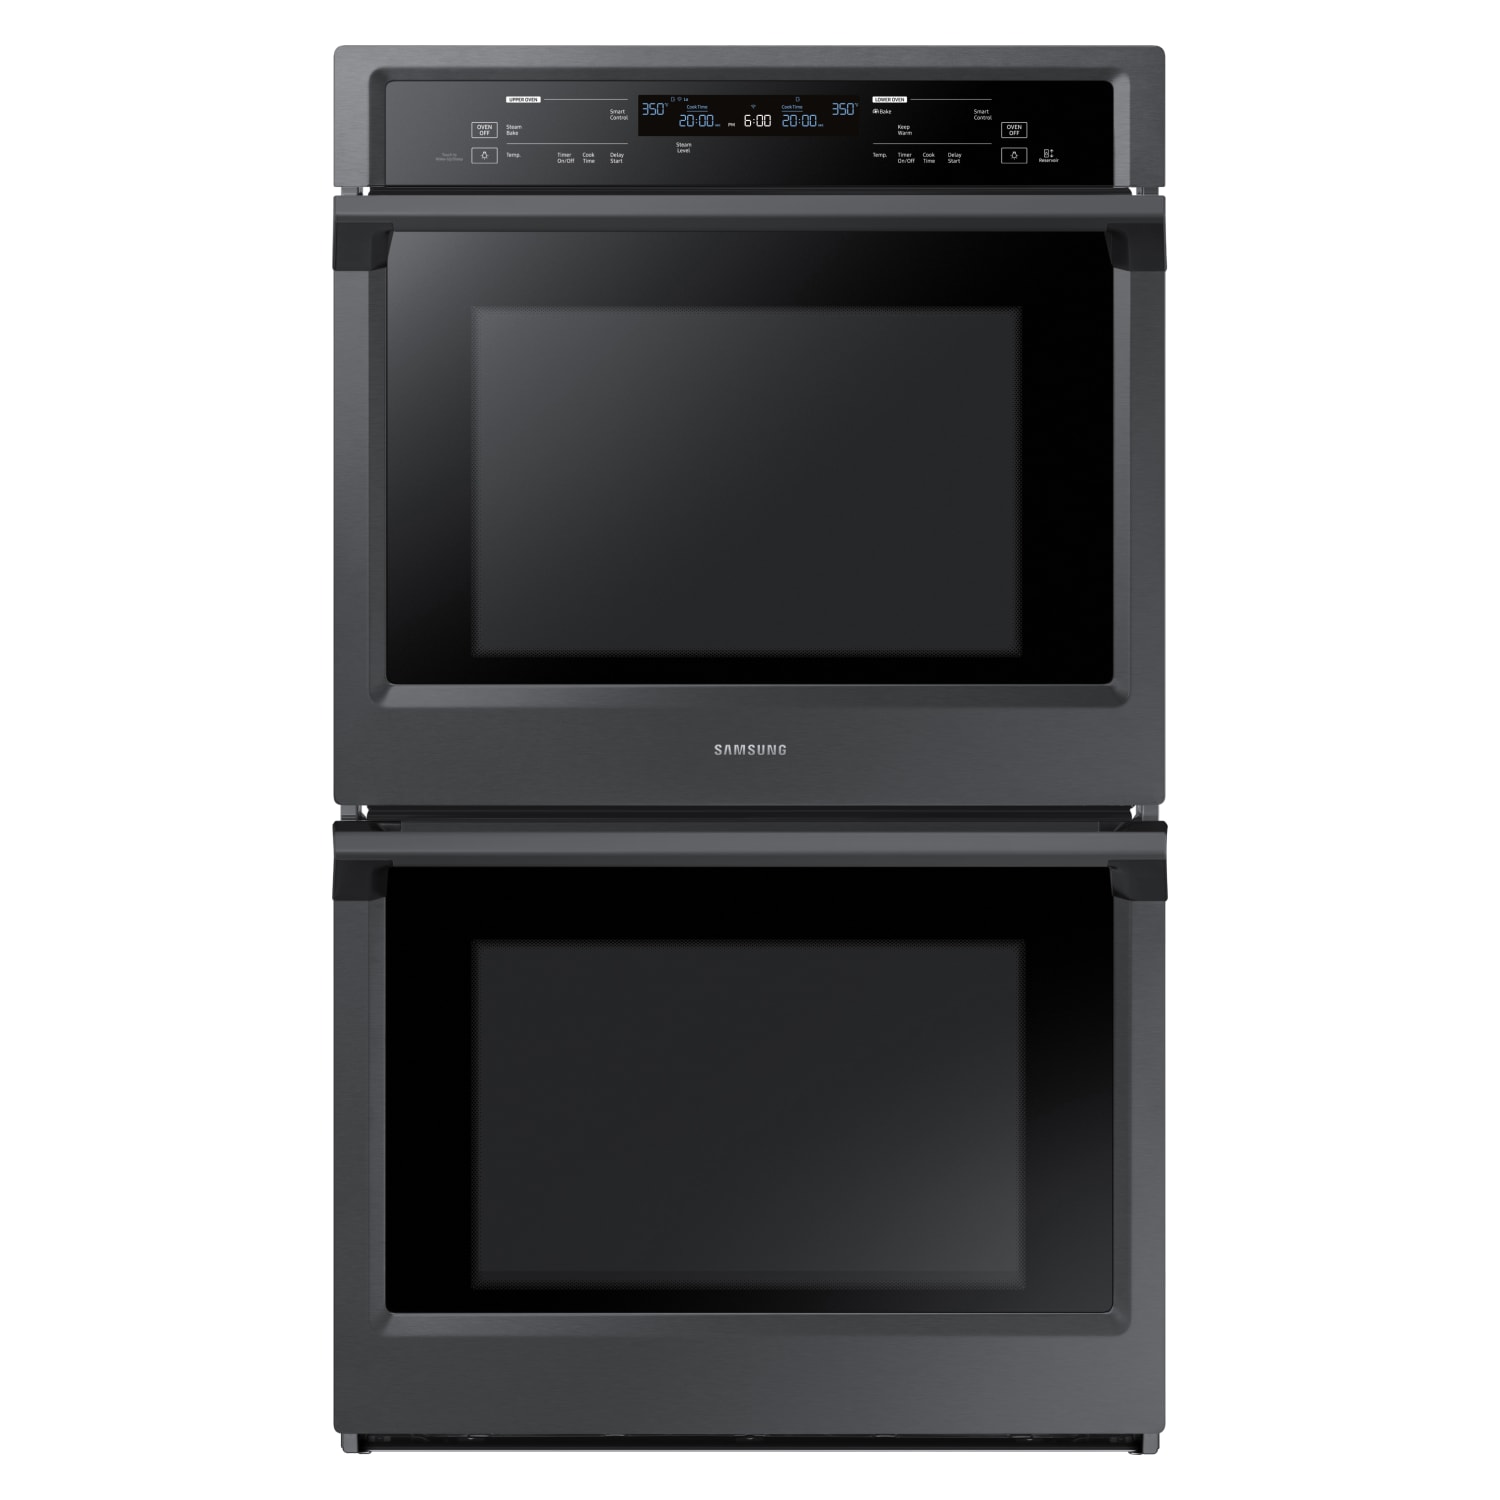 Samsung 5.1 cu. ft. Double Wall Oven 30”, Steam Cooking, True Convection, WIFI - Black Stainless Steel